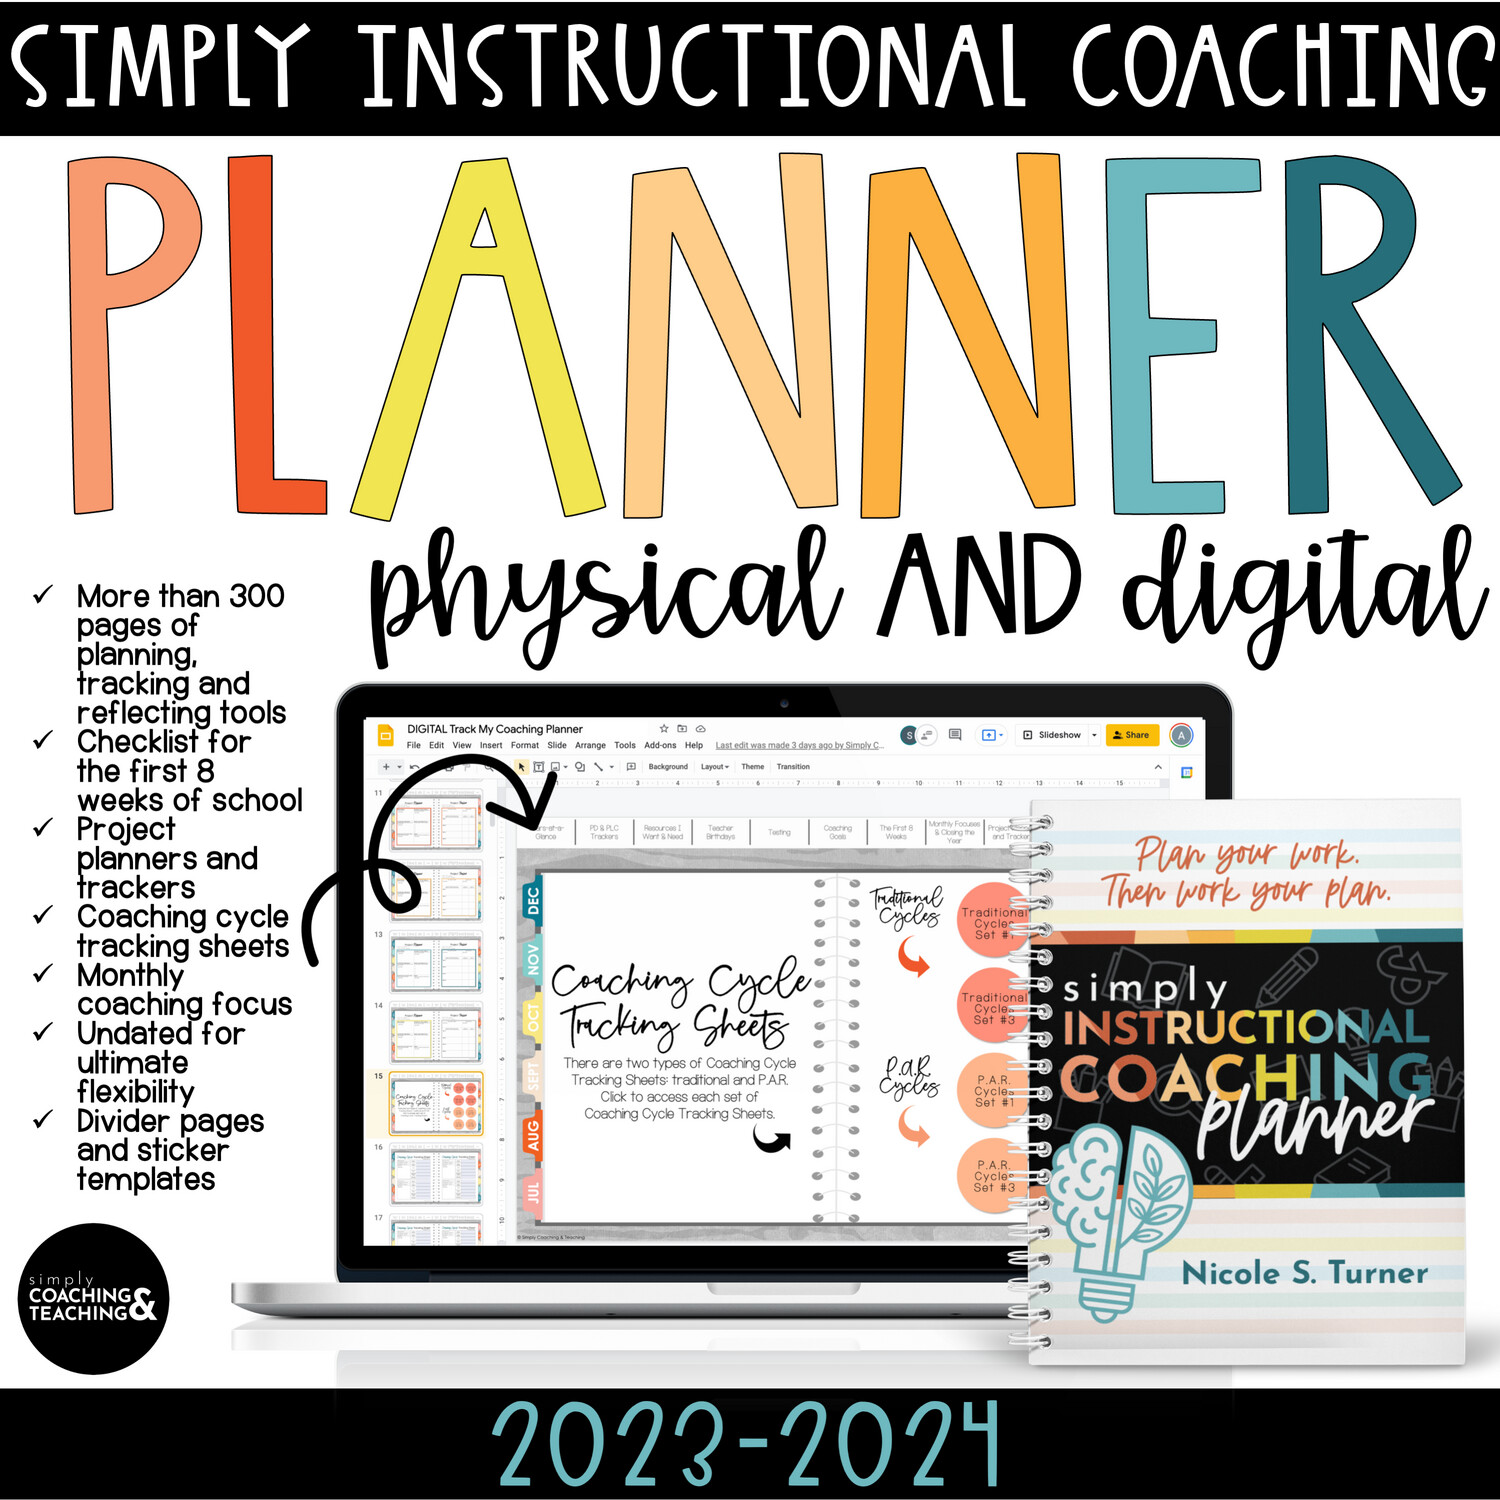 Simply Instructional Coaching 2023 - 2024 | Physical & Digital Planner